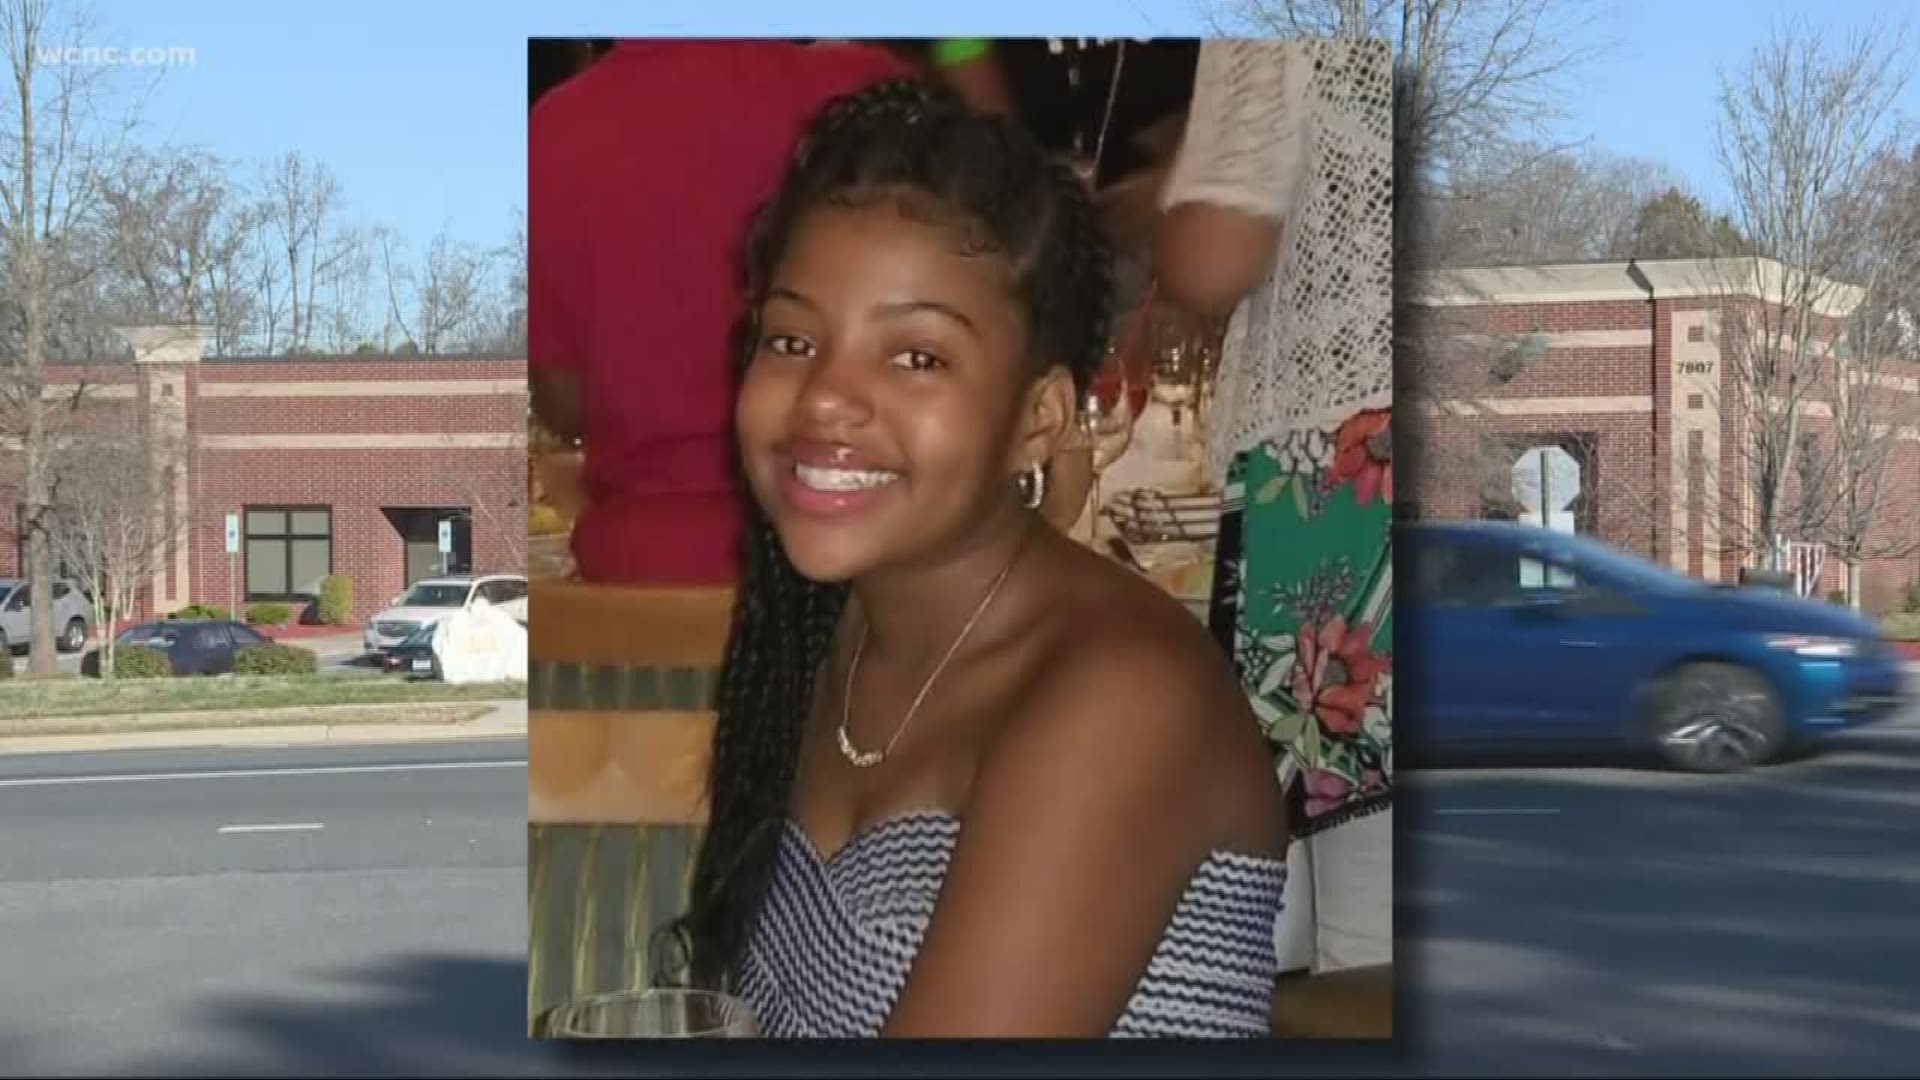 Aveanna Propst was shot and killed in a parking lot at Concord Mills last month.	The young girl's death has had a major impact on the community.